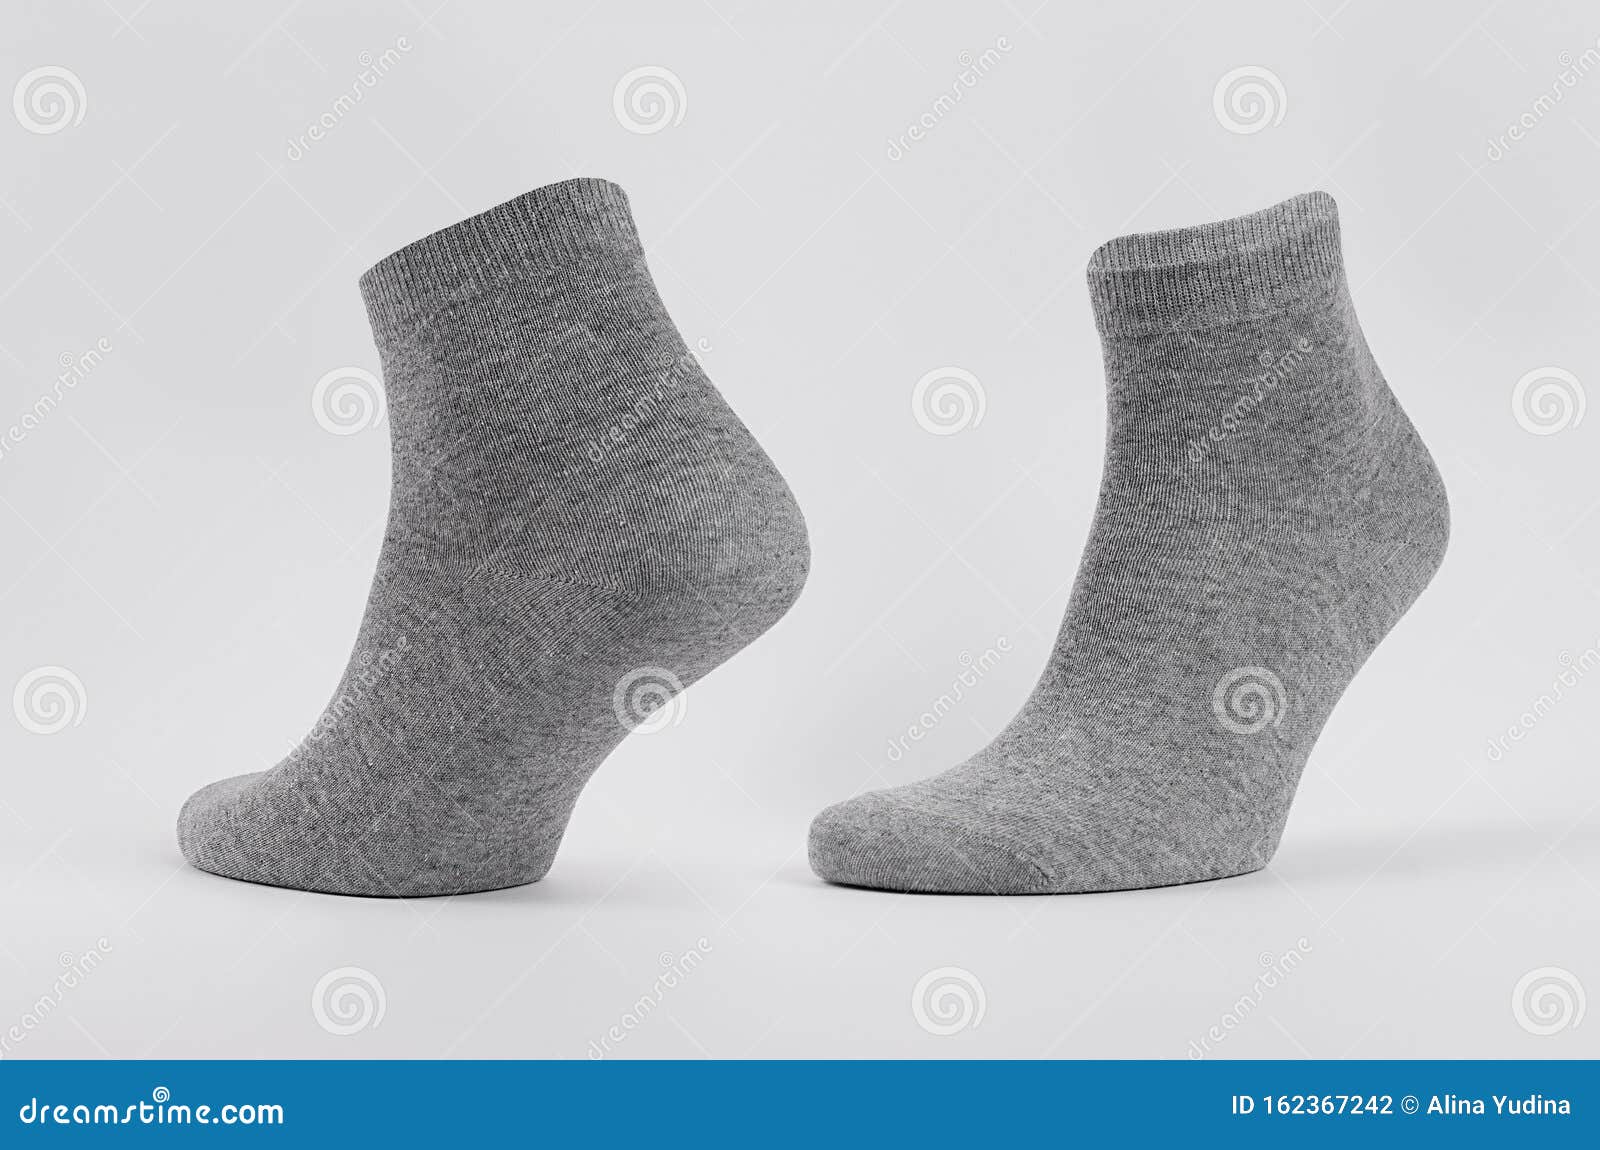 Download Grey Black Cotton Short Socks On Invisible Foot As Mock Up ...